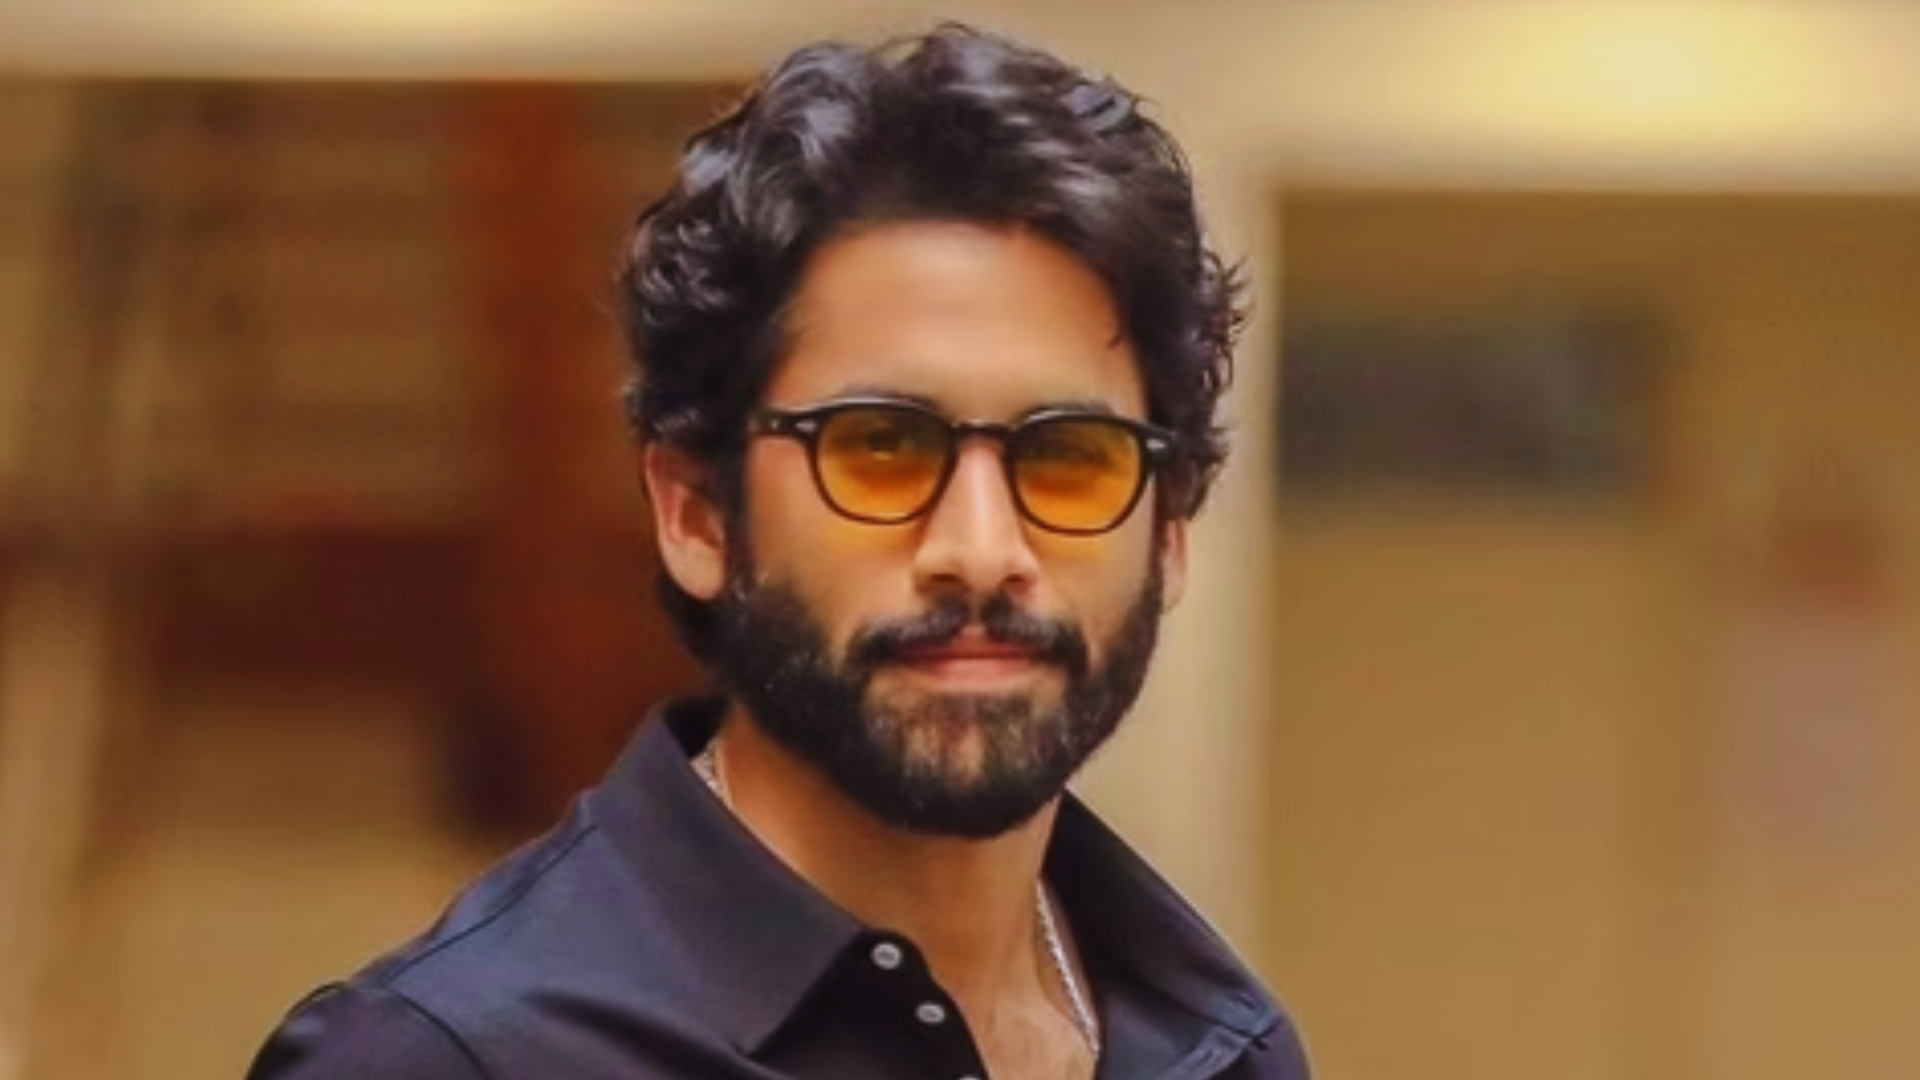 Lok Sabha Polls: Naga Chaitanya Casts His Vote In Hyderabad Looking All Dapper In A Casual Outfit